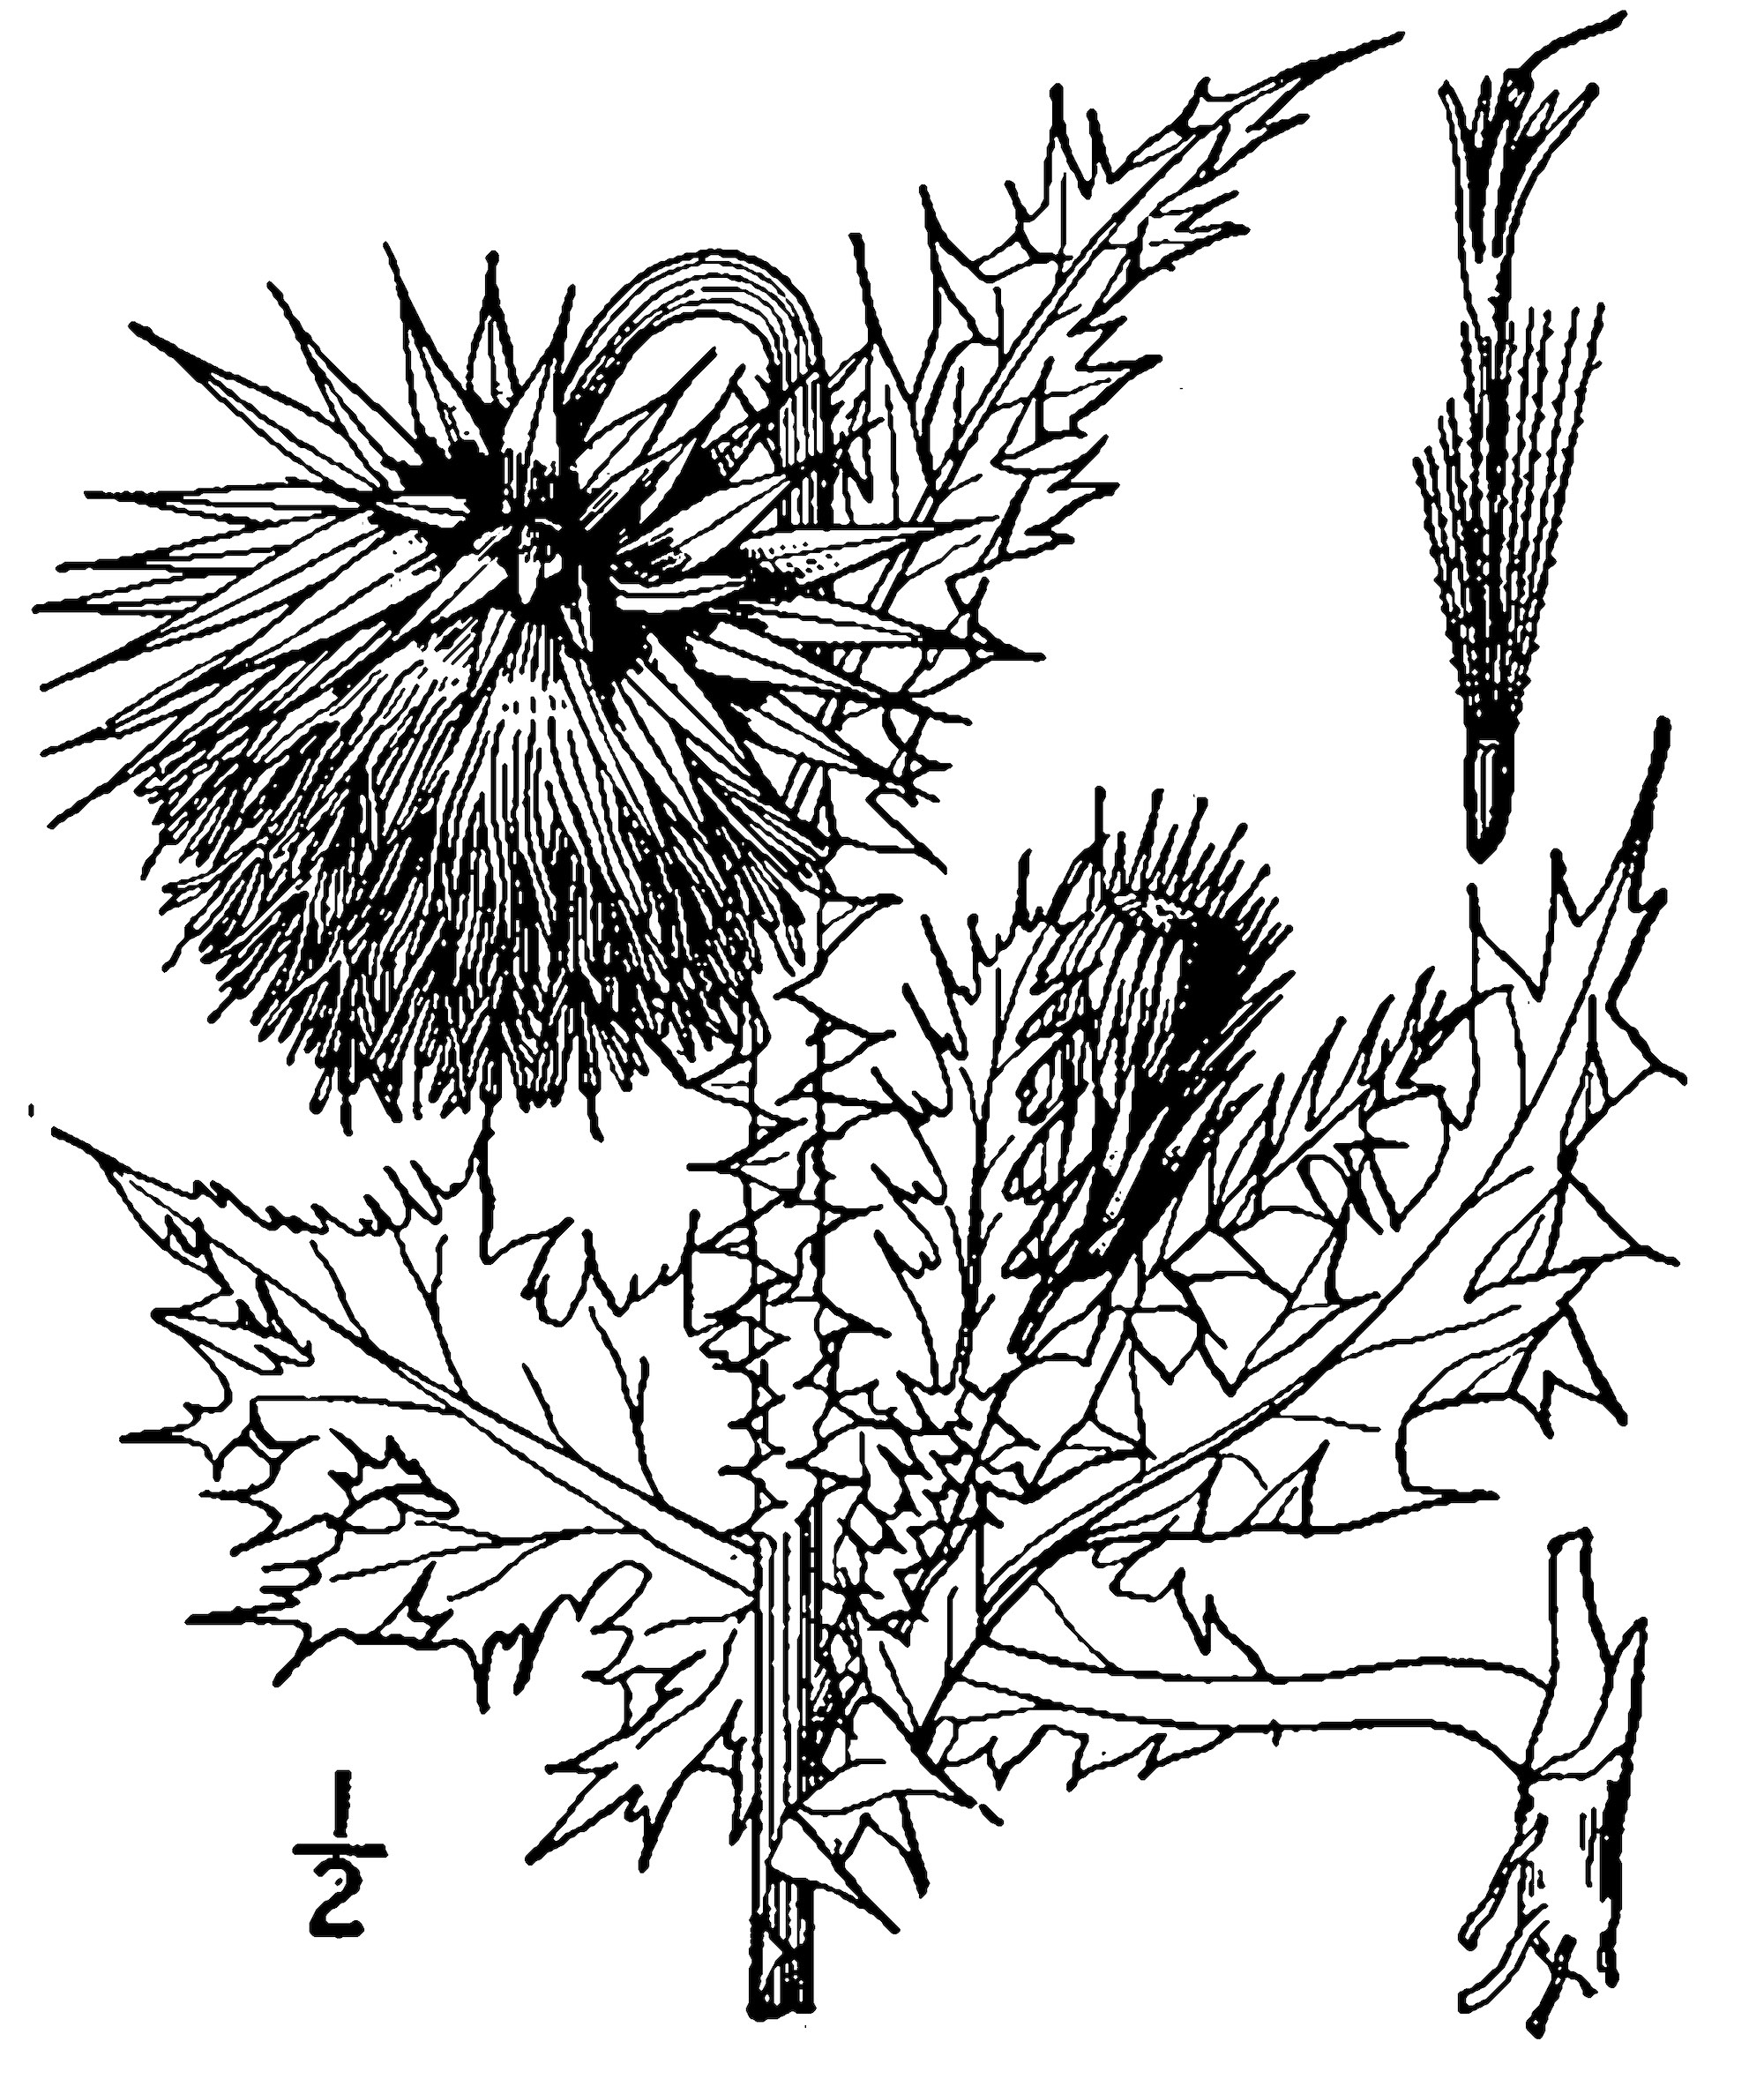 1913 Musk Thistle drawing.